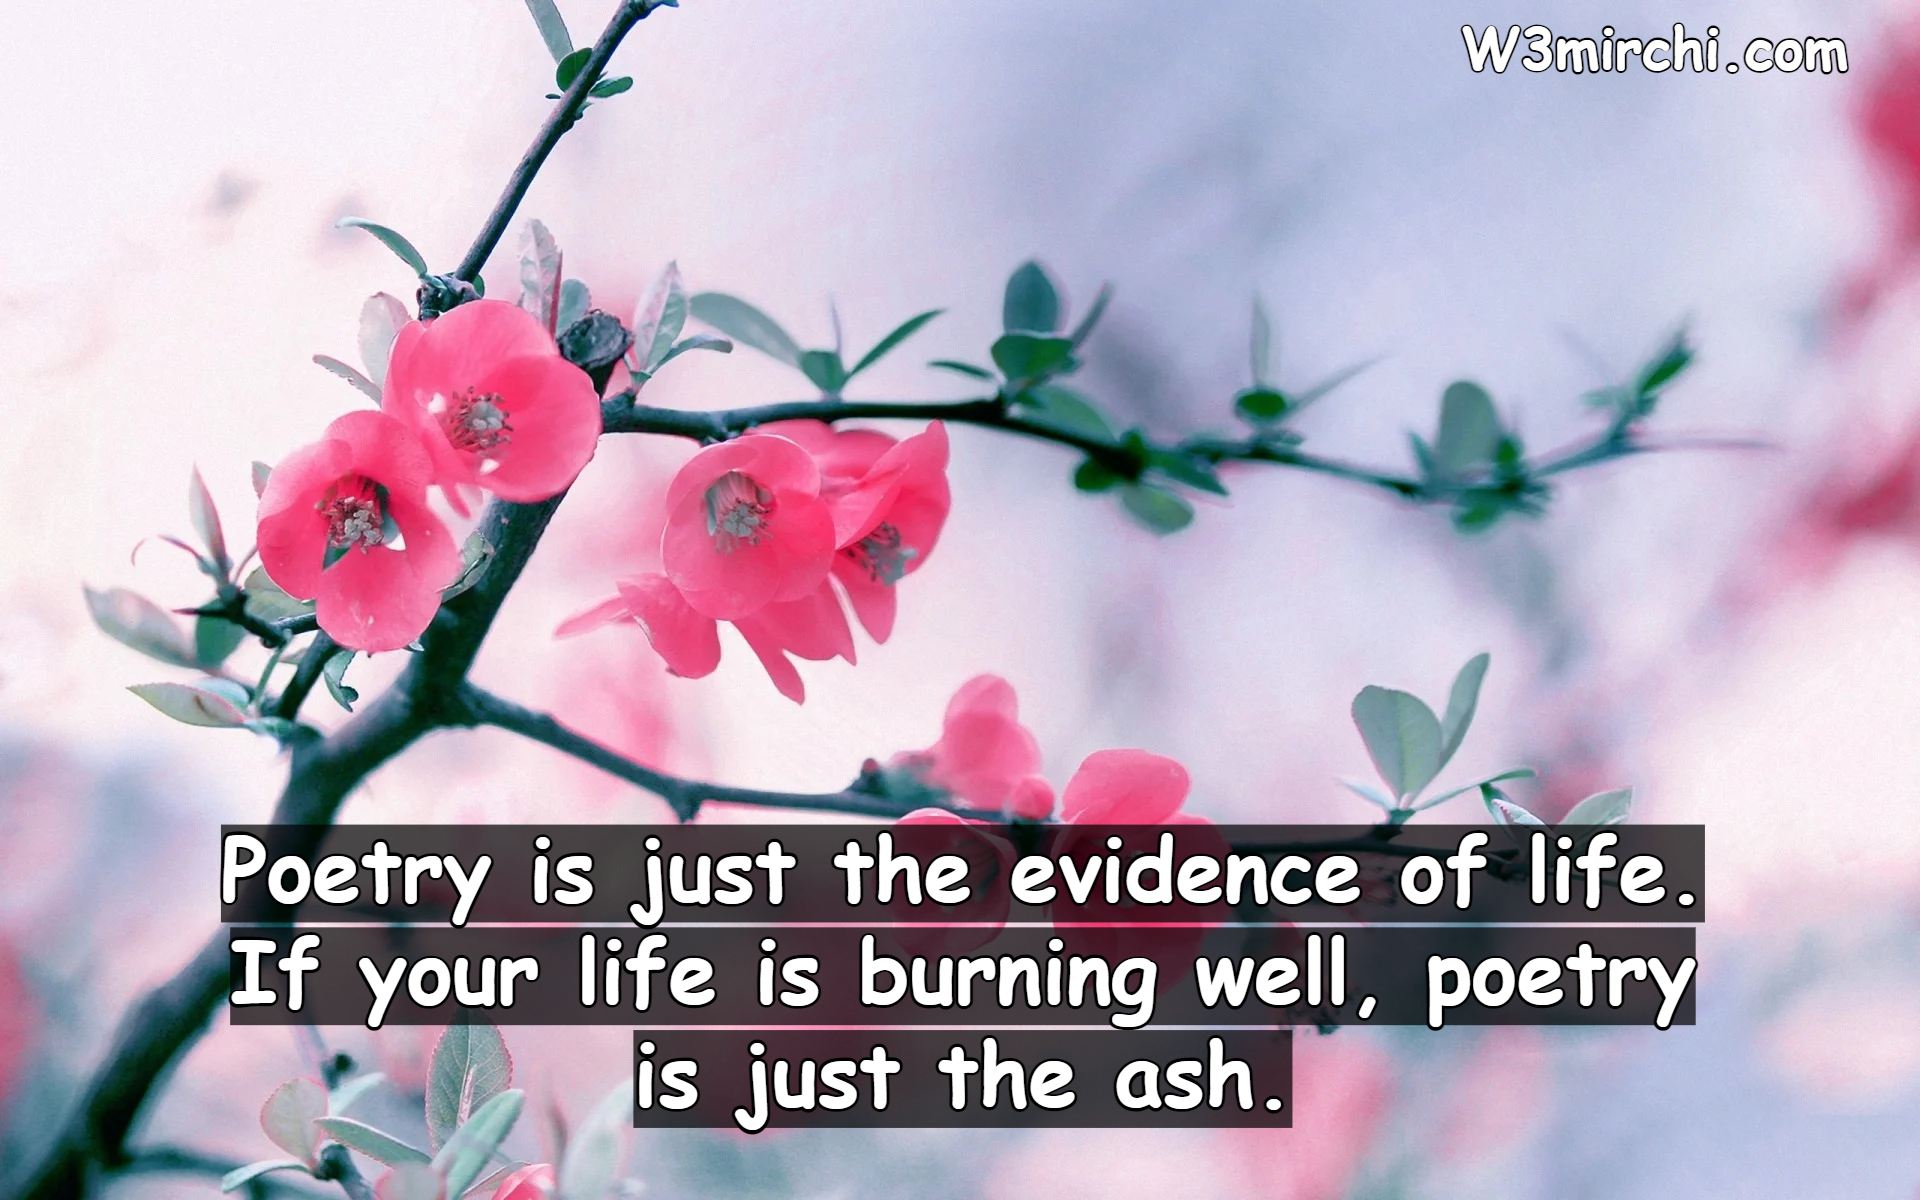 Poetry is just the evidence of life.